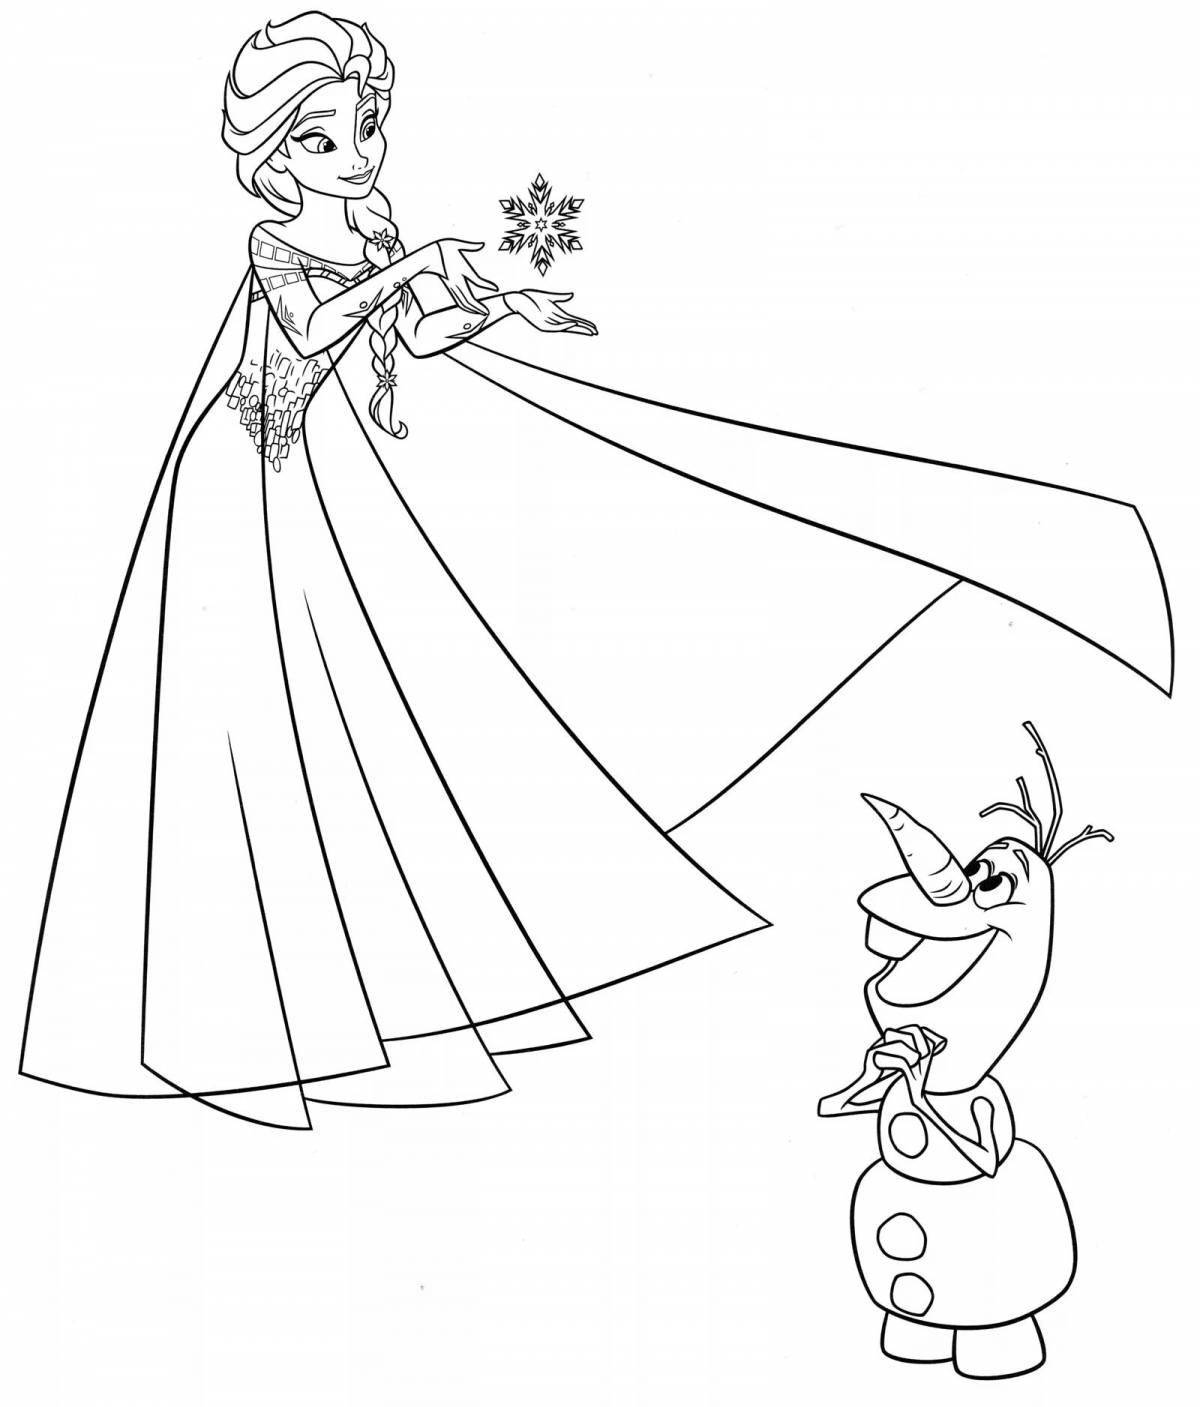 Radiant coloring page ol and elsa